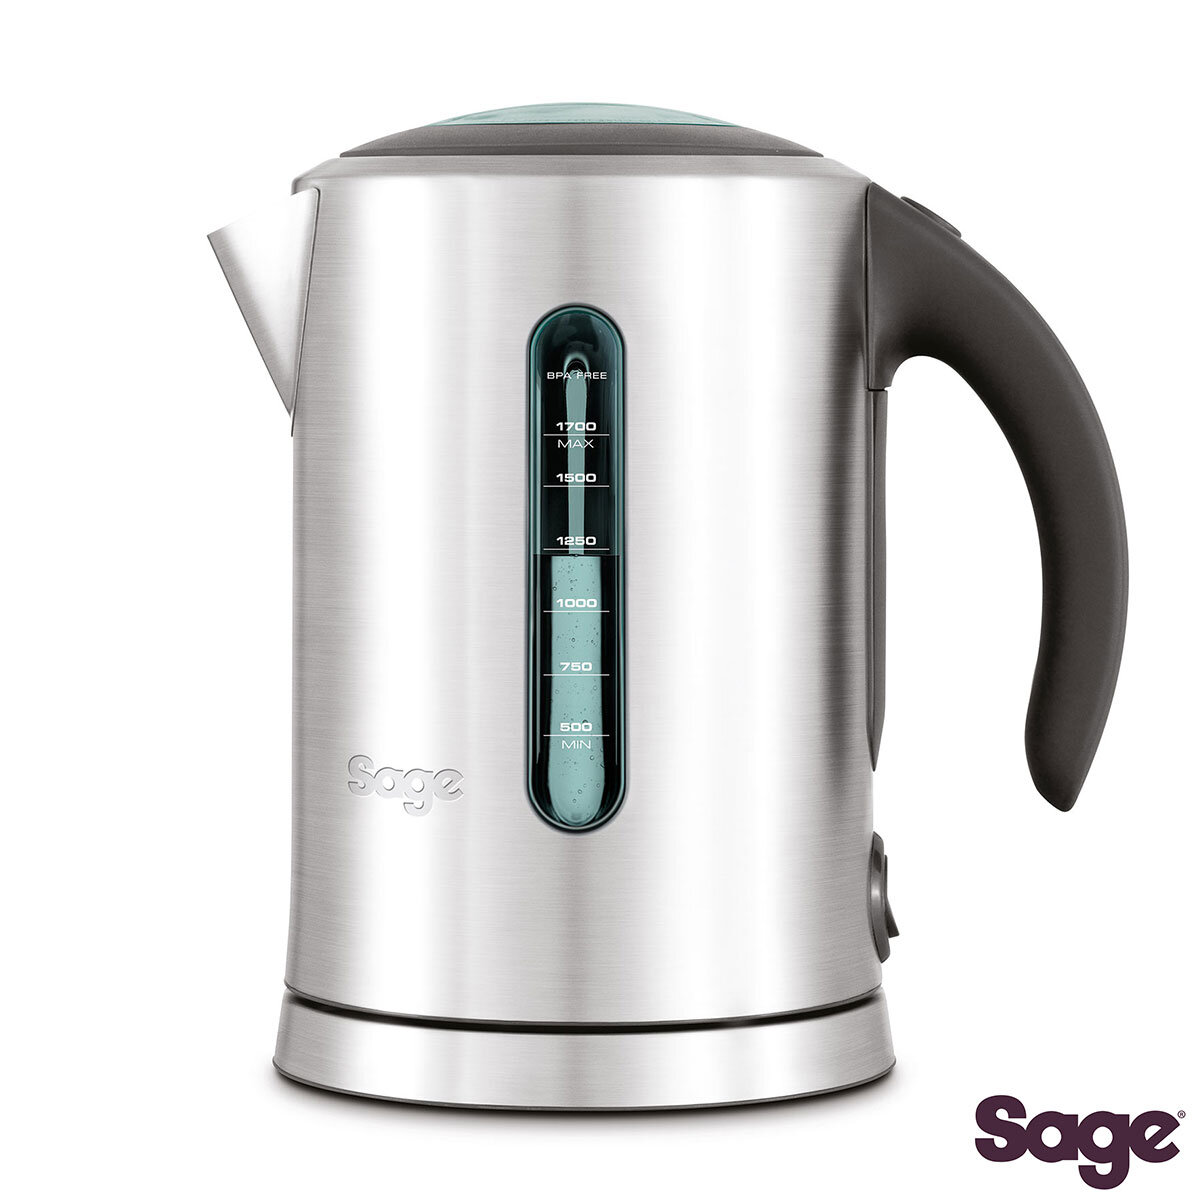 Sage Soft Top Pure 1.7L Kettle in Brushed Stainless Steel, SKE700BSS 